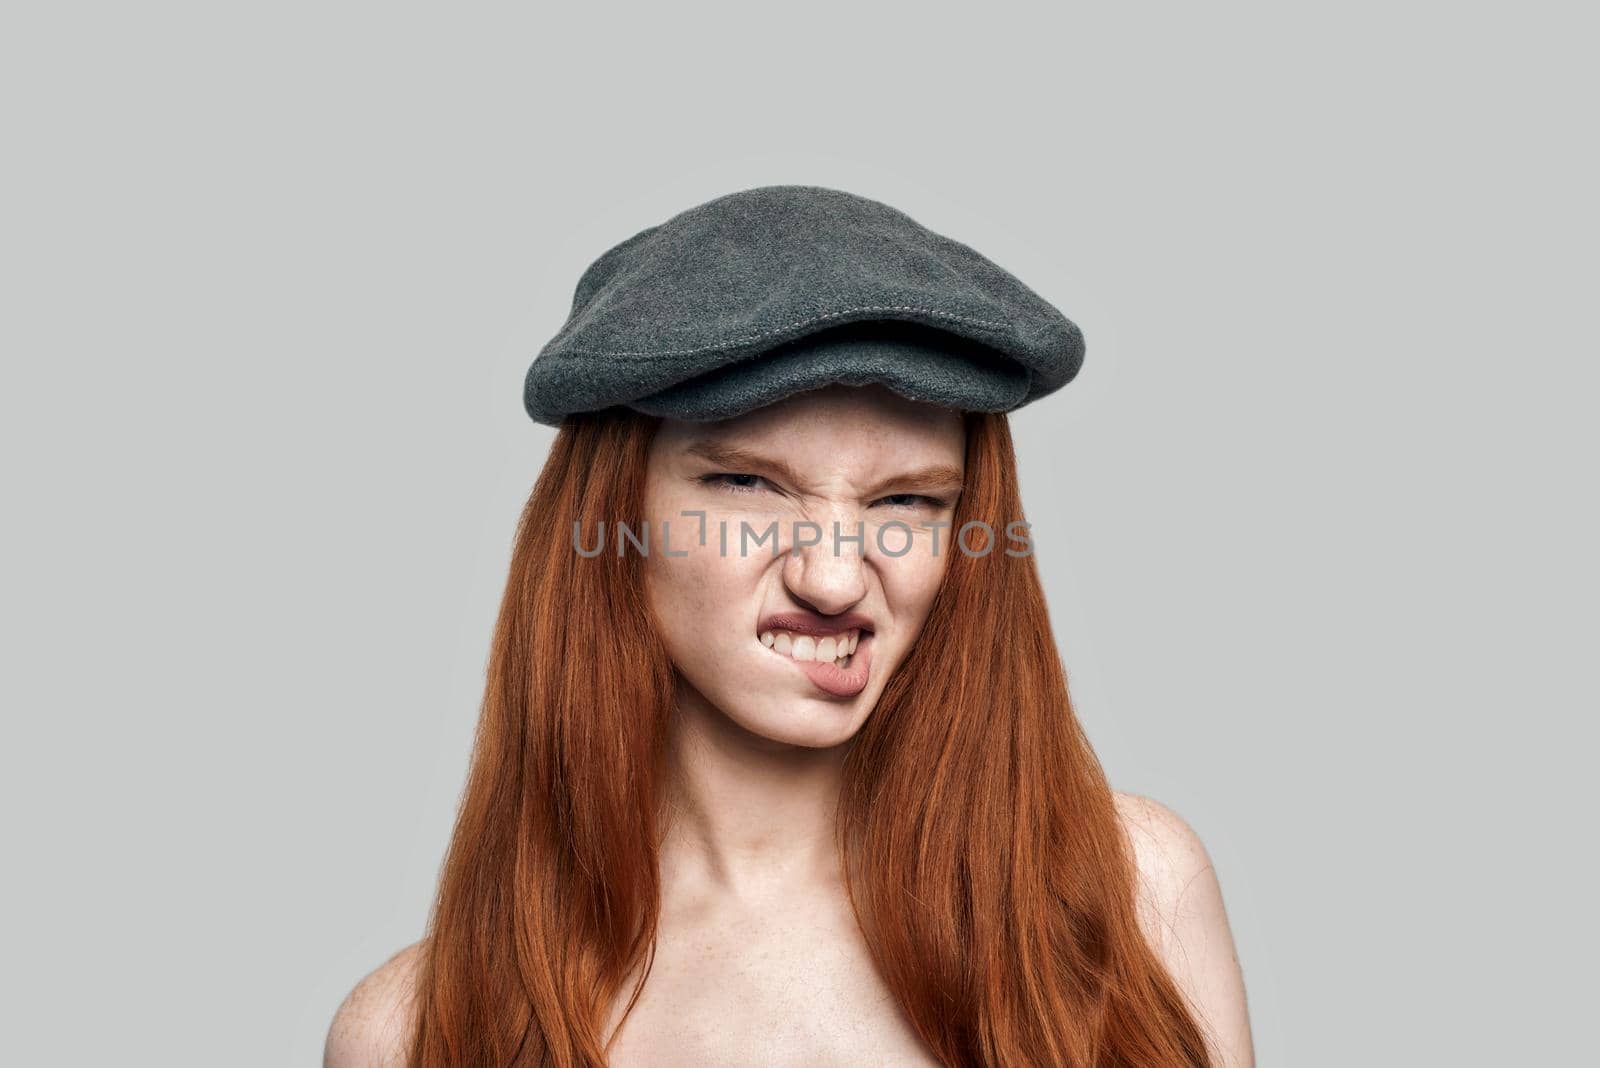 Rude girl. Portrait of young dissatisfied redhead woman in headgear biting a lip and looking at camera while standing against grey background by friendsstock